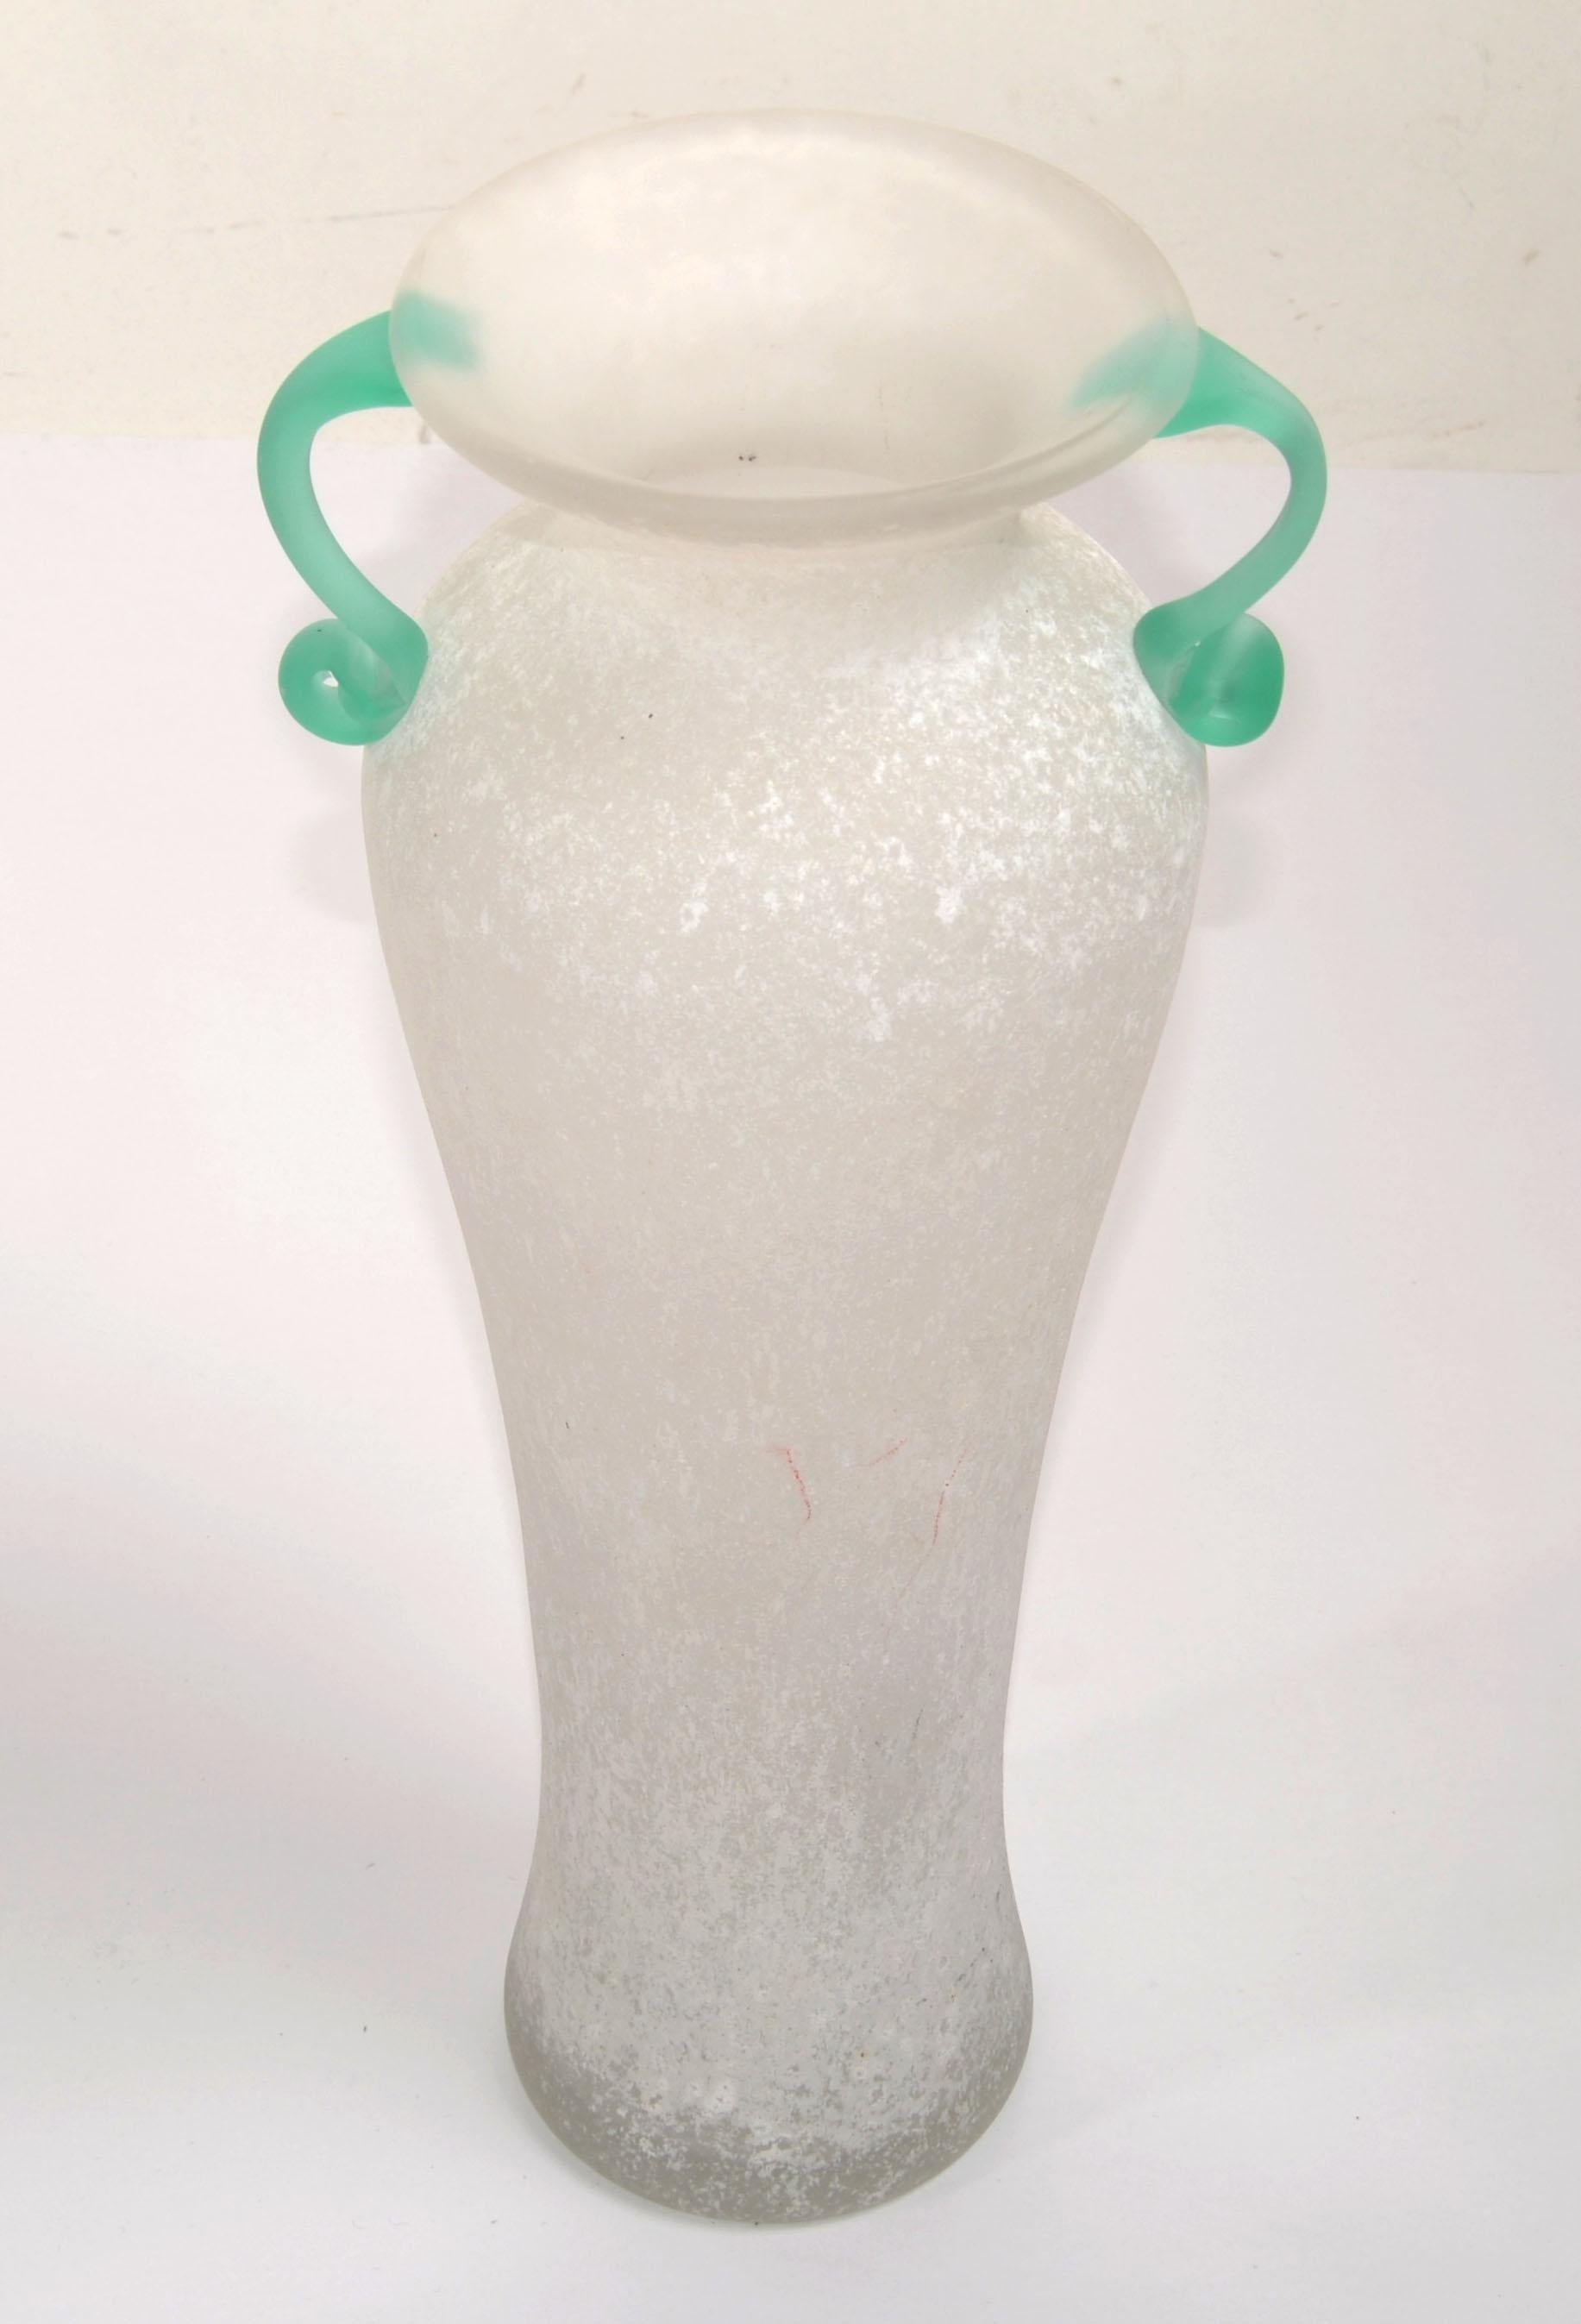 Archimede Seguso Italy Scavo Bianco white & mint green Art Glass Murano Flower vase, vessel, decanter Mid-Century Modern made by Seguso Vetri d'Arte Italy circa in 1980s.
In very good vintage condition, normal wear due to History. 
No cracks, No